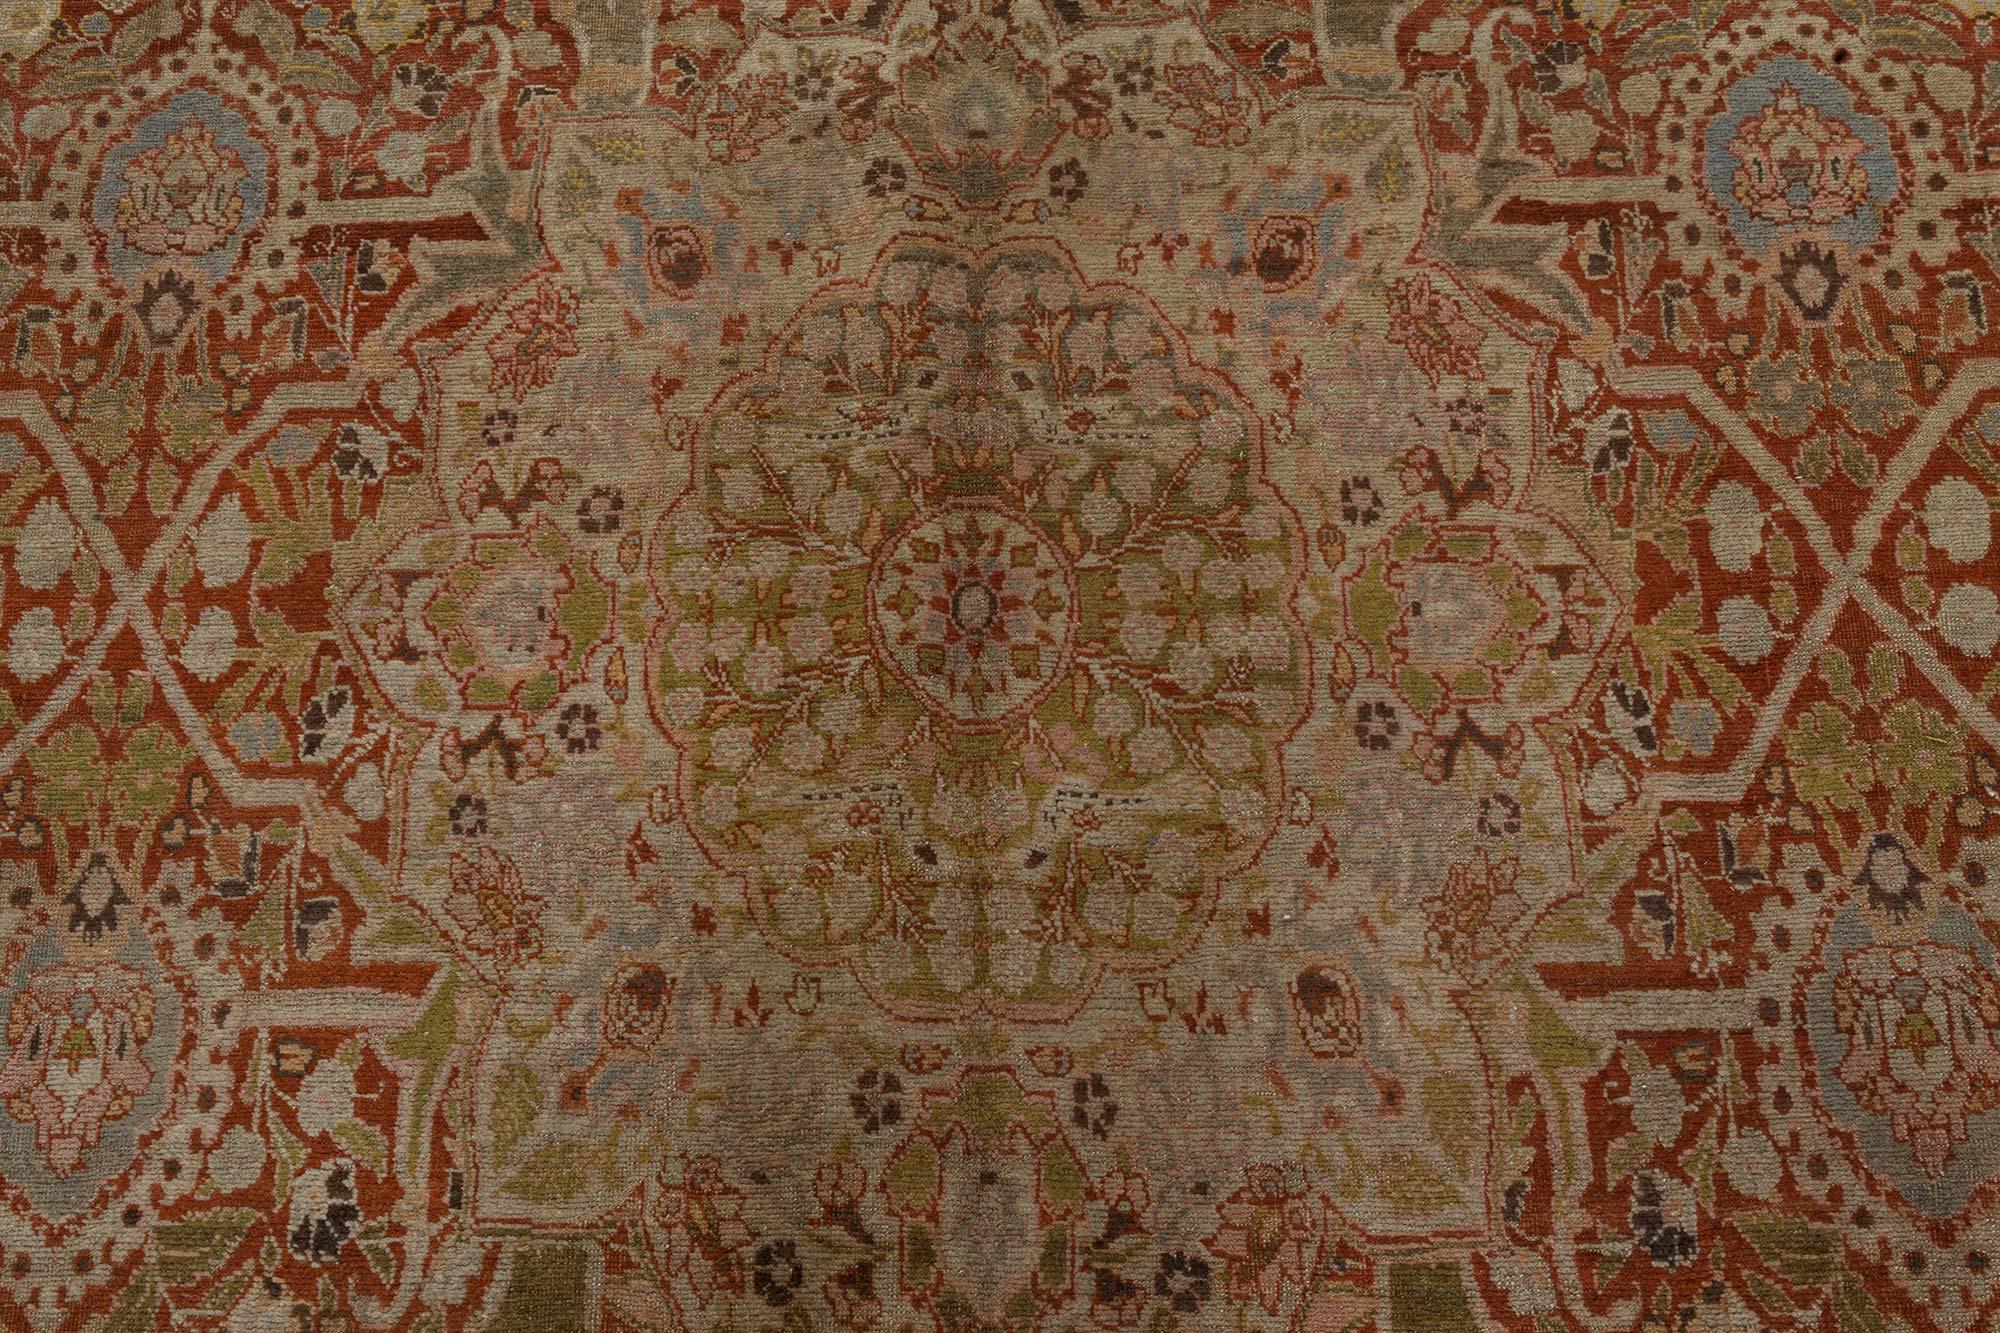 Fine Antique Persian Tabriz hand knotted wool rug
Size: 9'3